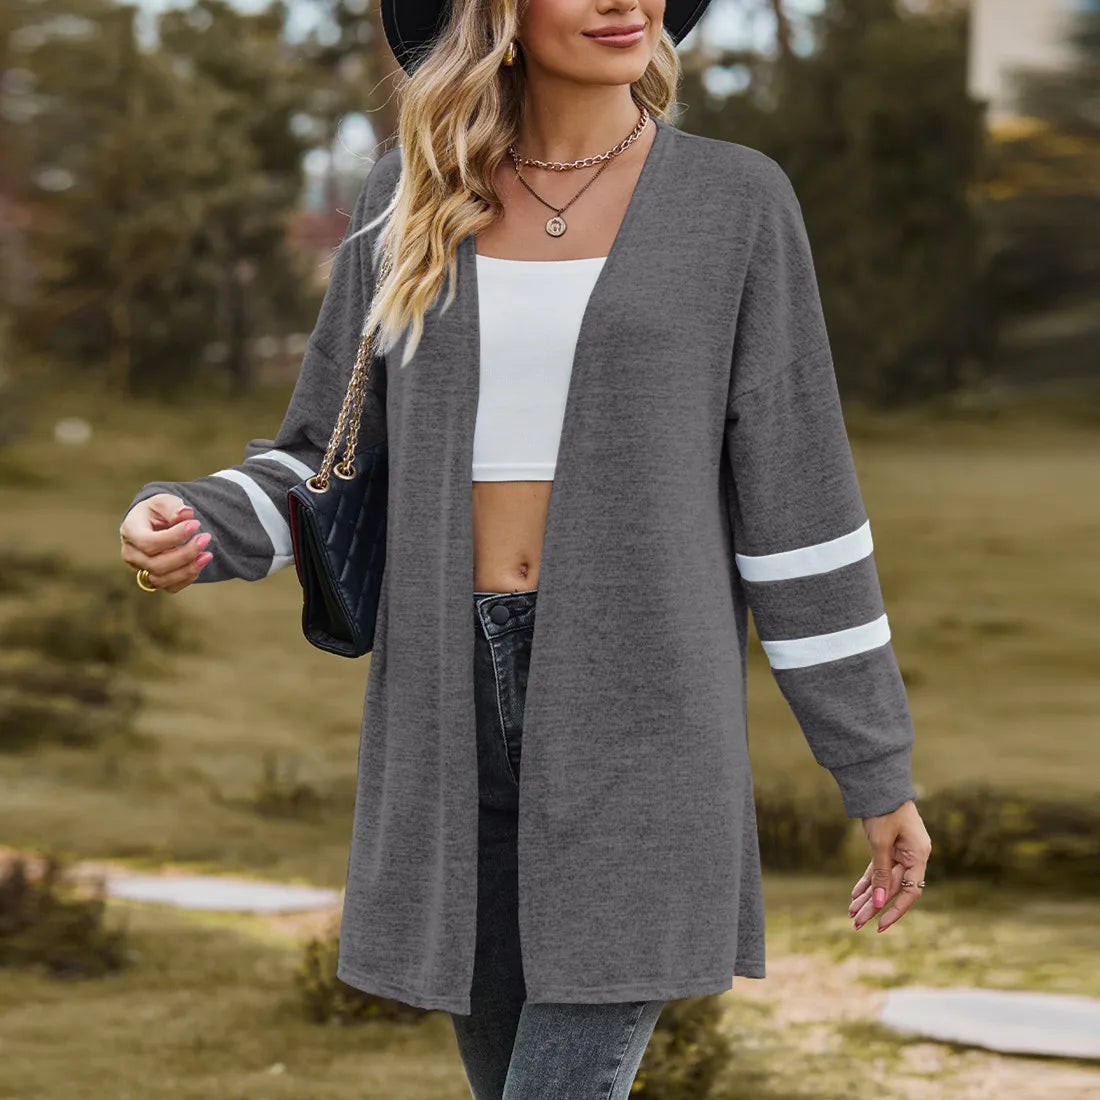 Autumn Clothing Knit Cardigan for Women Knitwears Pink Grey Long Sleeve Top Open Stitch - TaMNz